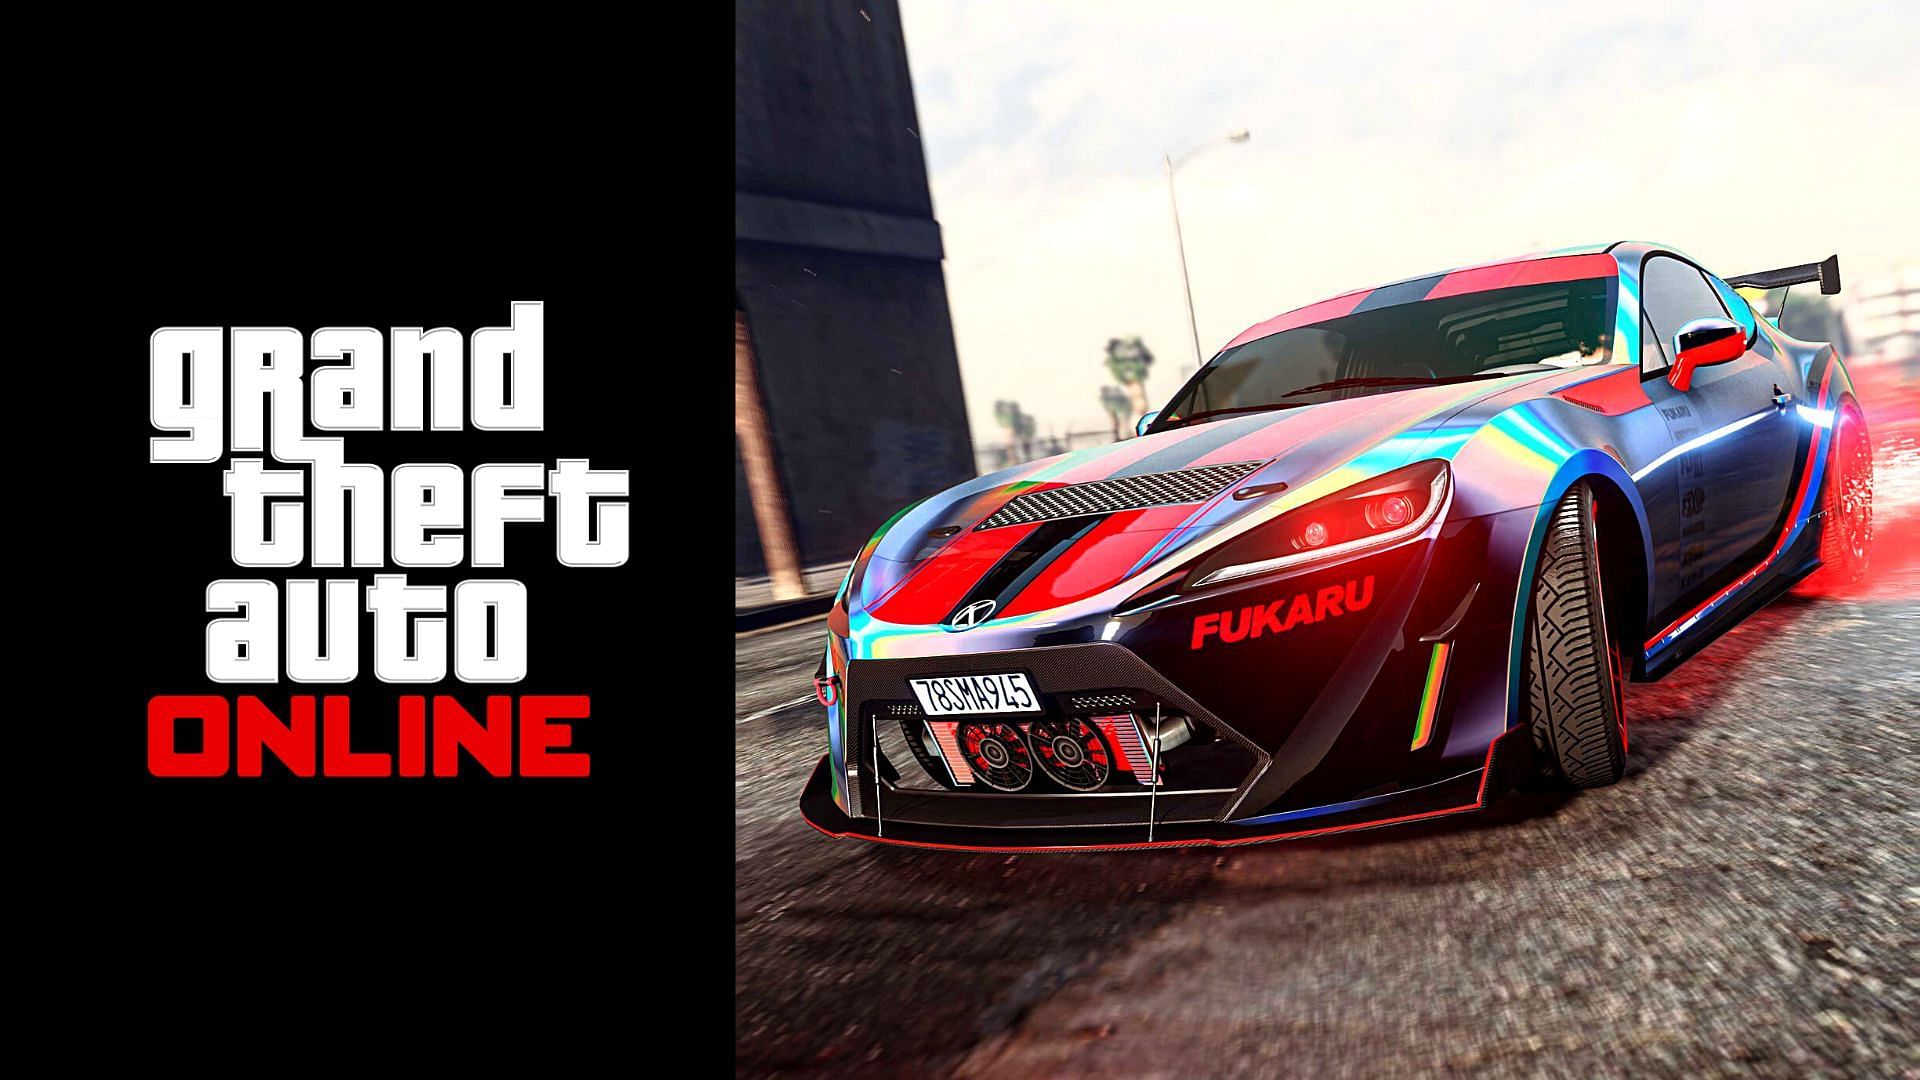 A brief about the new GTA Online weekly update for December 8 - December 12 (Image via Rockstar Games)